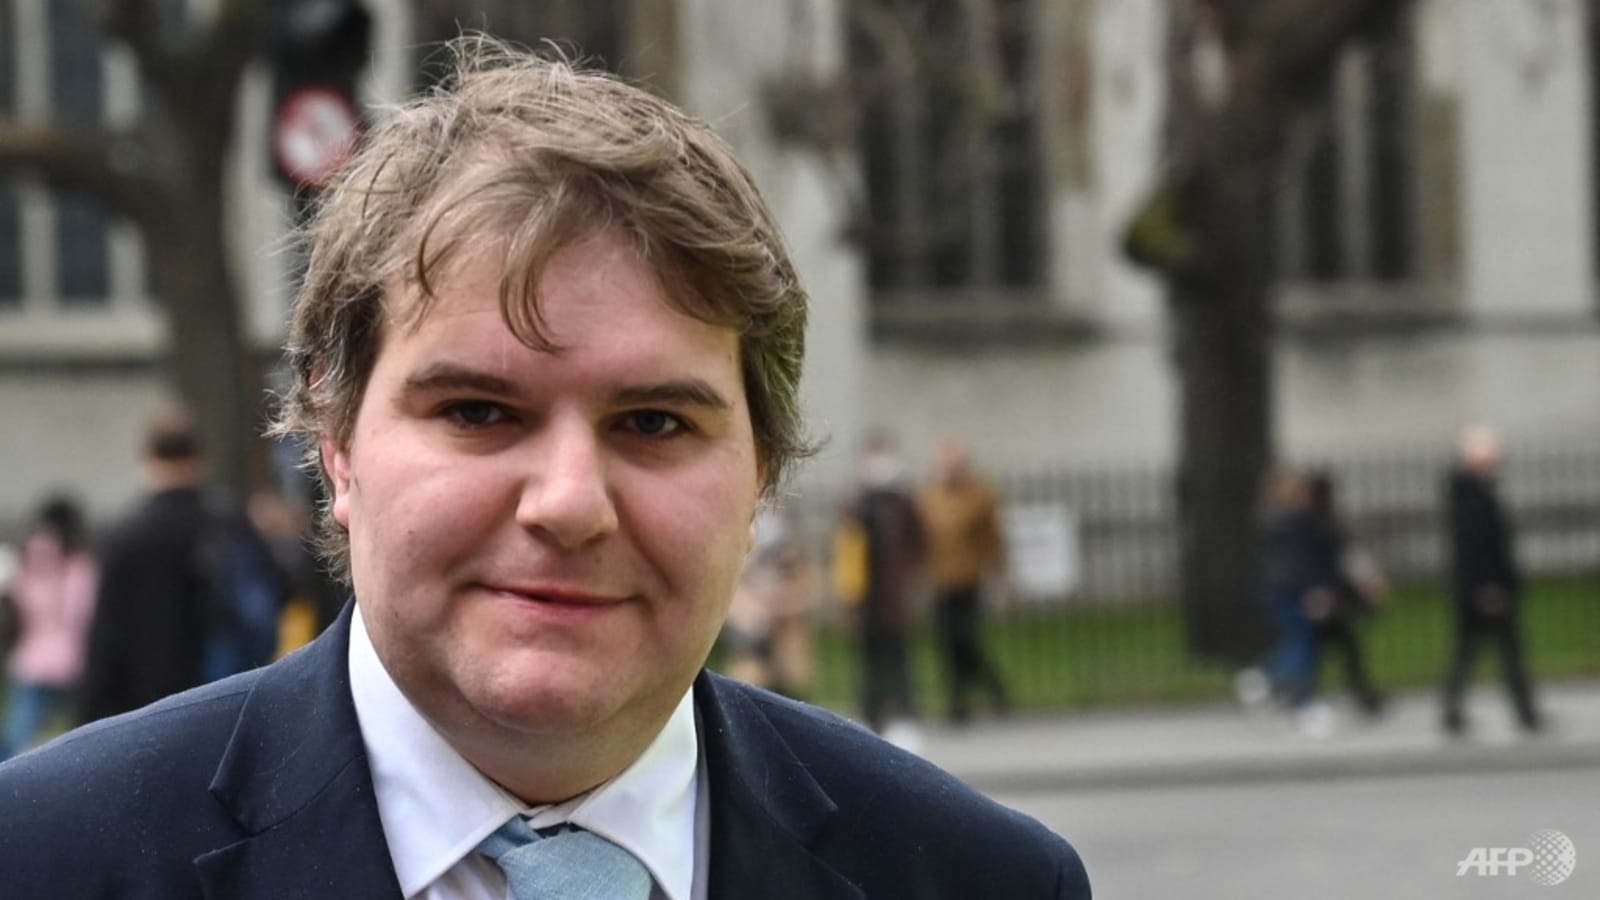 uk-lawmaker-becomes-first-to-come-out-as-trans